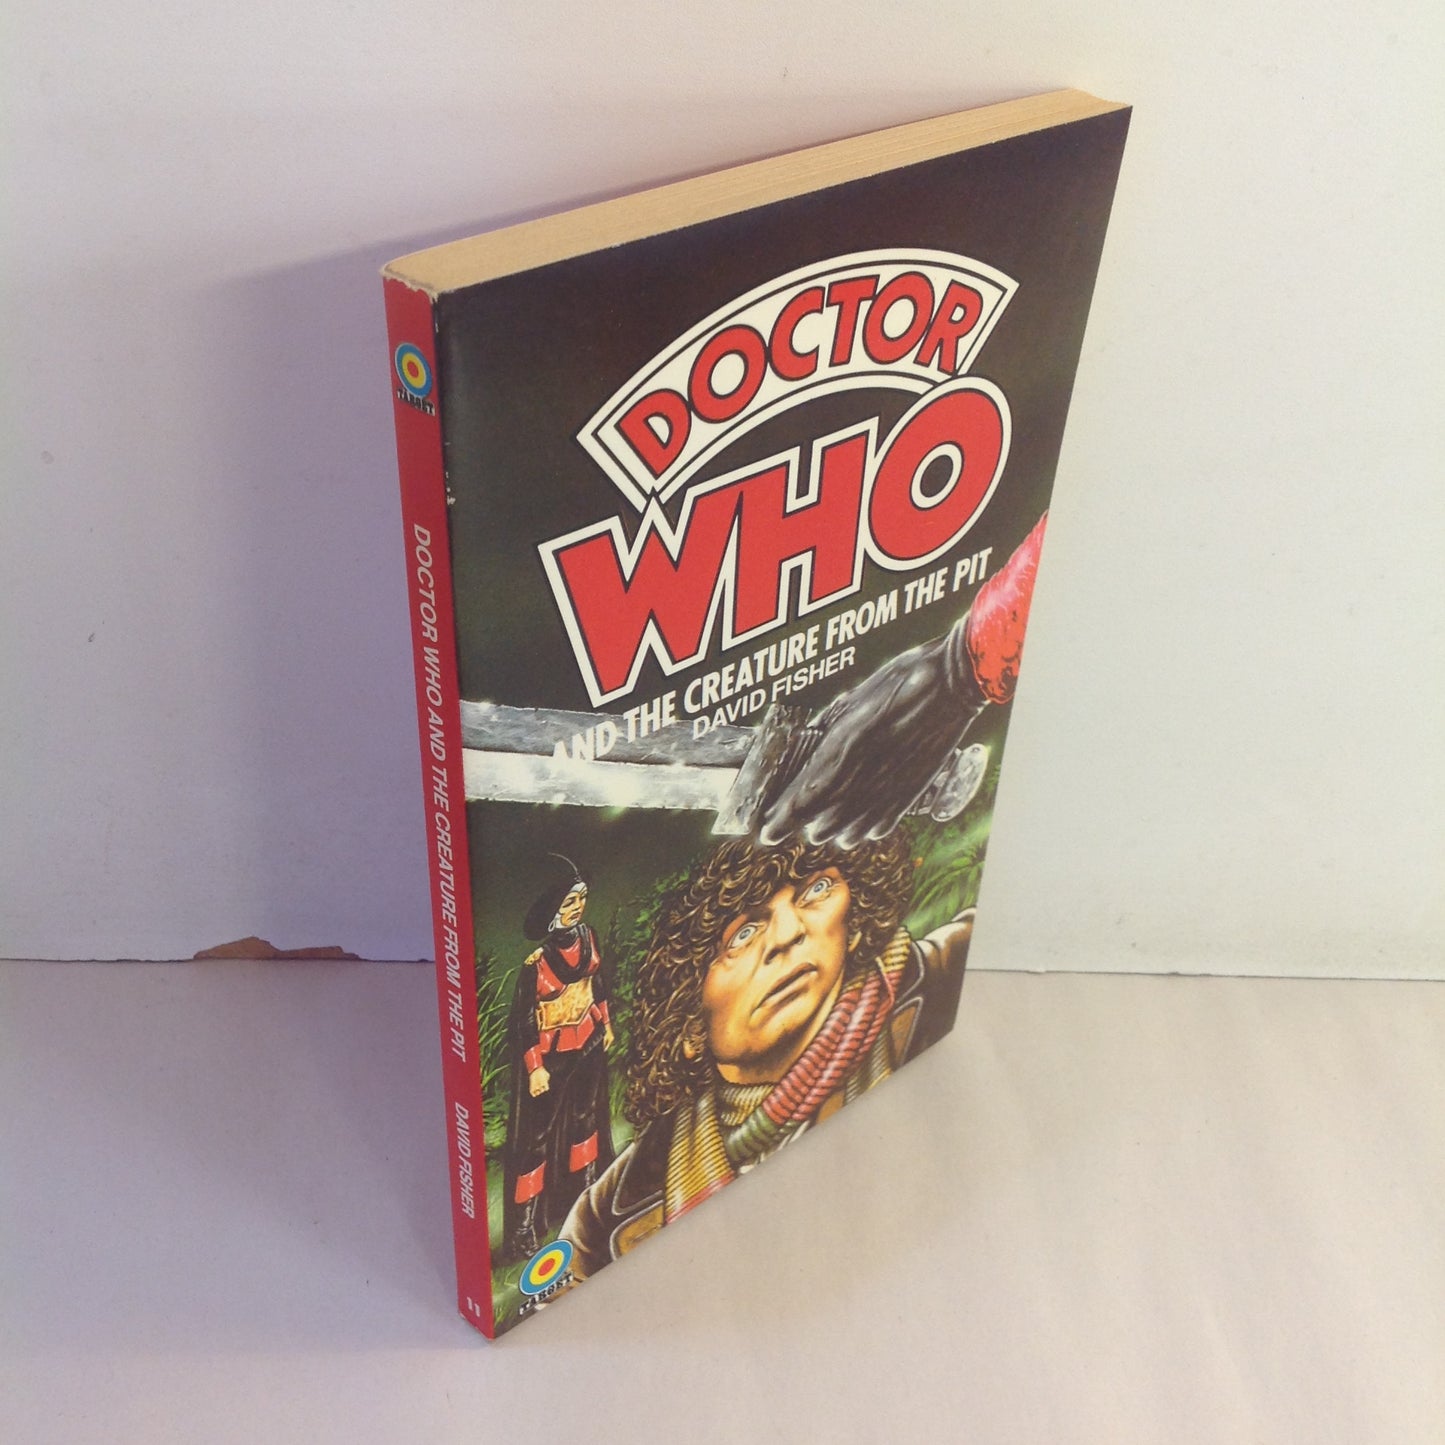 Vintage 1981 Mass Market Paperback Doctor Who and the Creature from the Pit David Fisher First Edition